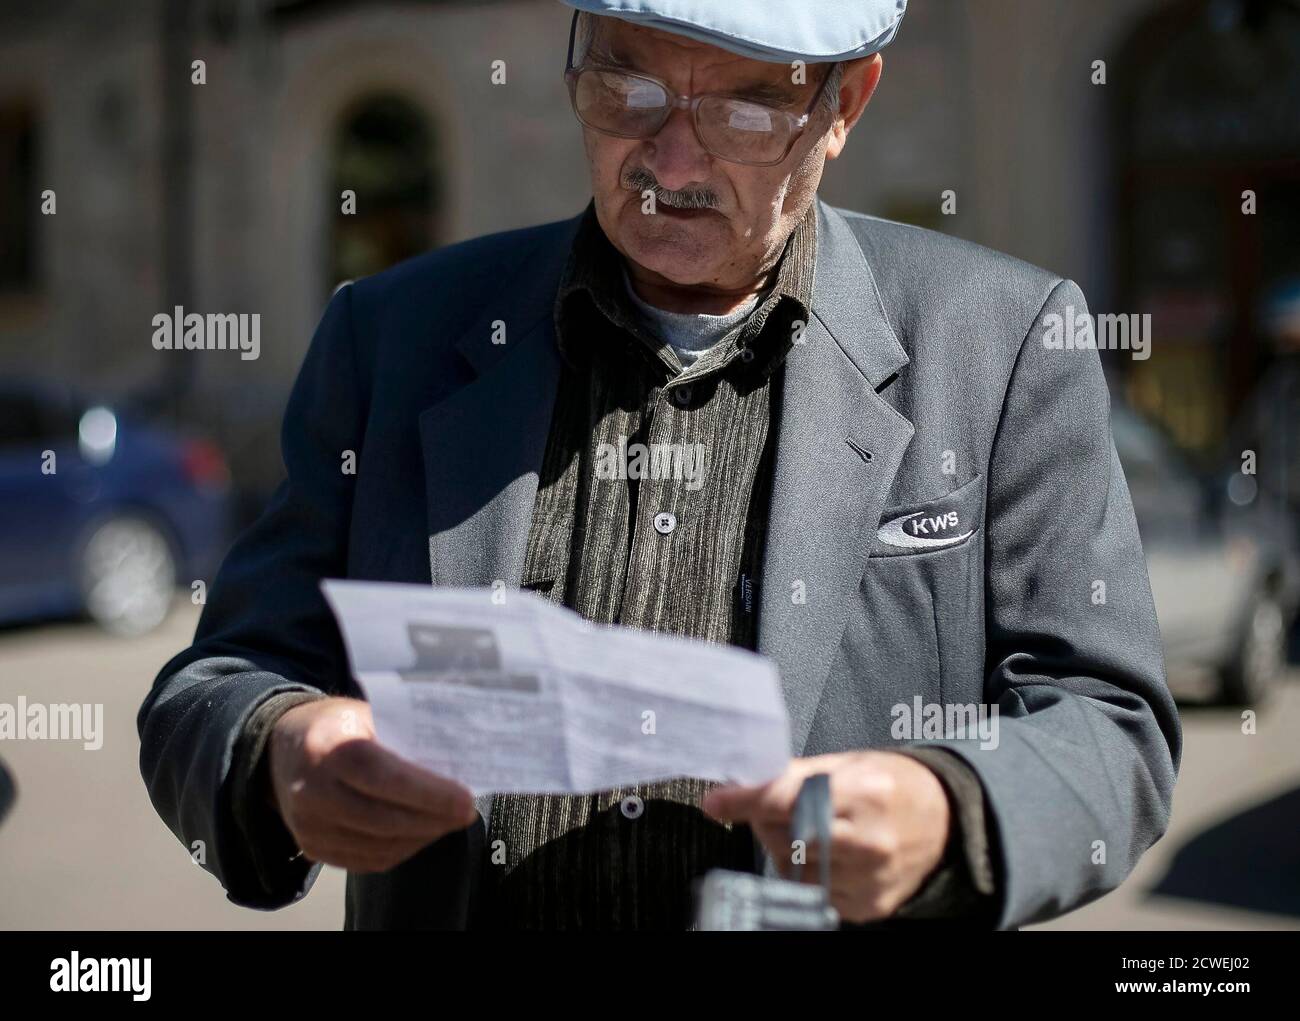 A man reads a leaflet, dropped from a Ukrainian helicopter, in Slaviansk April 25, 2014. Ukrainian Prime Minister Arseny Yatseniuk accused Russia on Friday of wanting to start World War Three by occupying Ukraine 'militarily and politically'.  REUTERS/Gleb Garanich  (UKRAINE - Tags: POLITICS CIVIL UNREST) Stock Photo